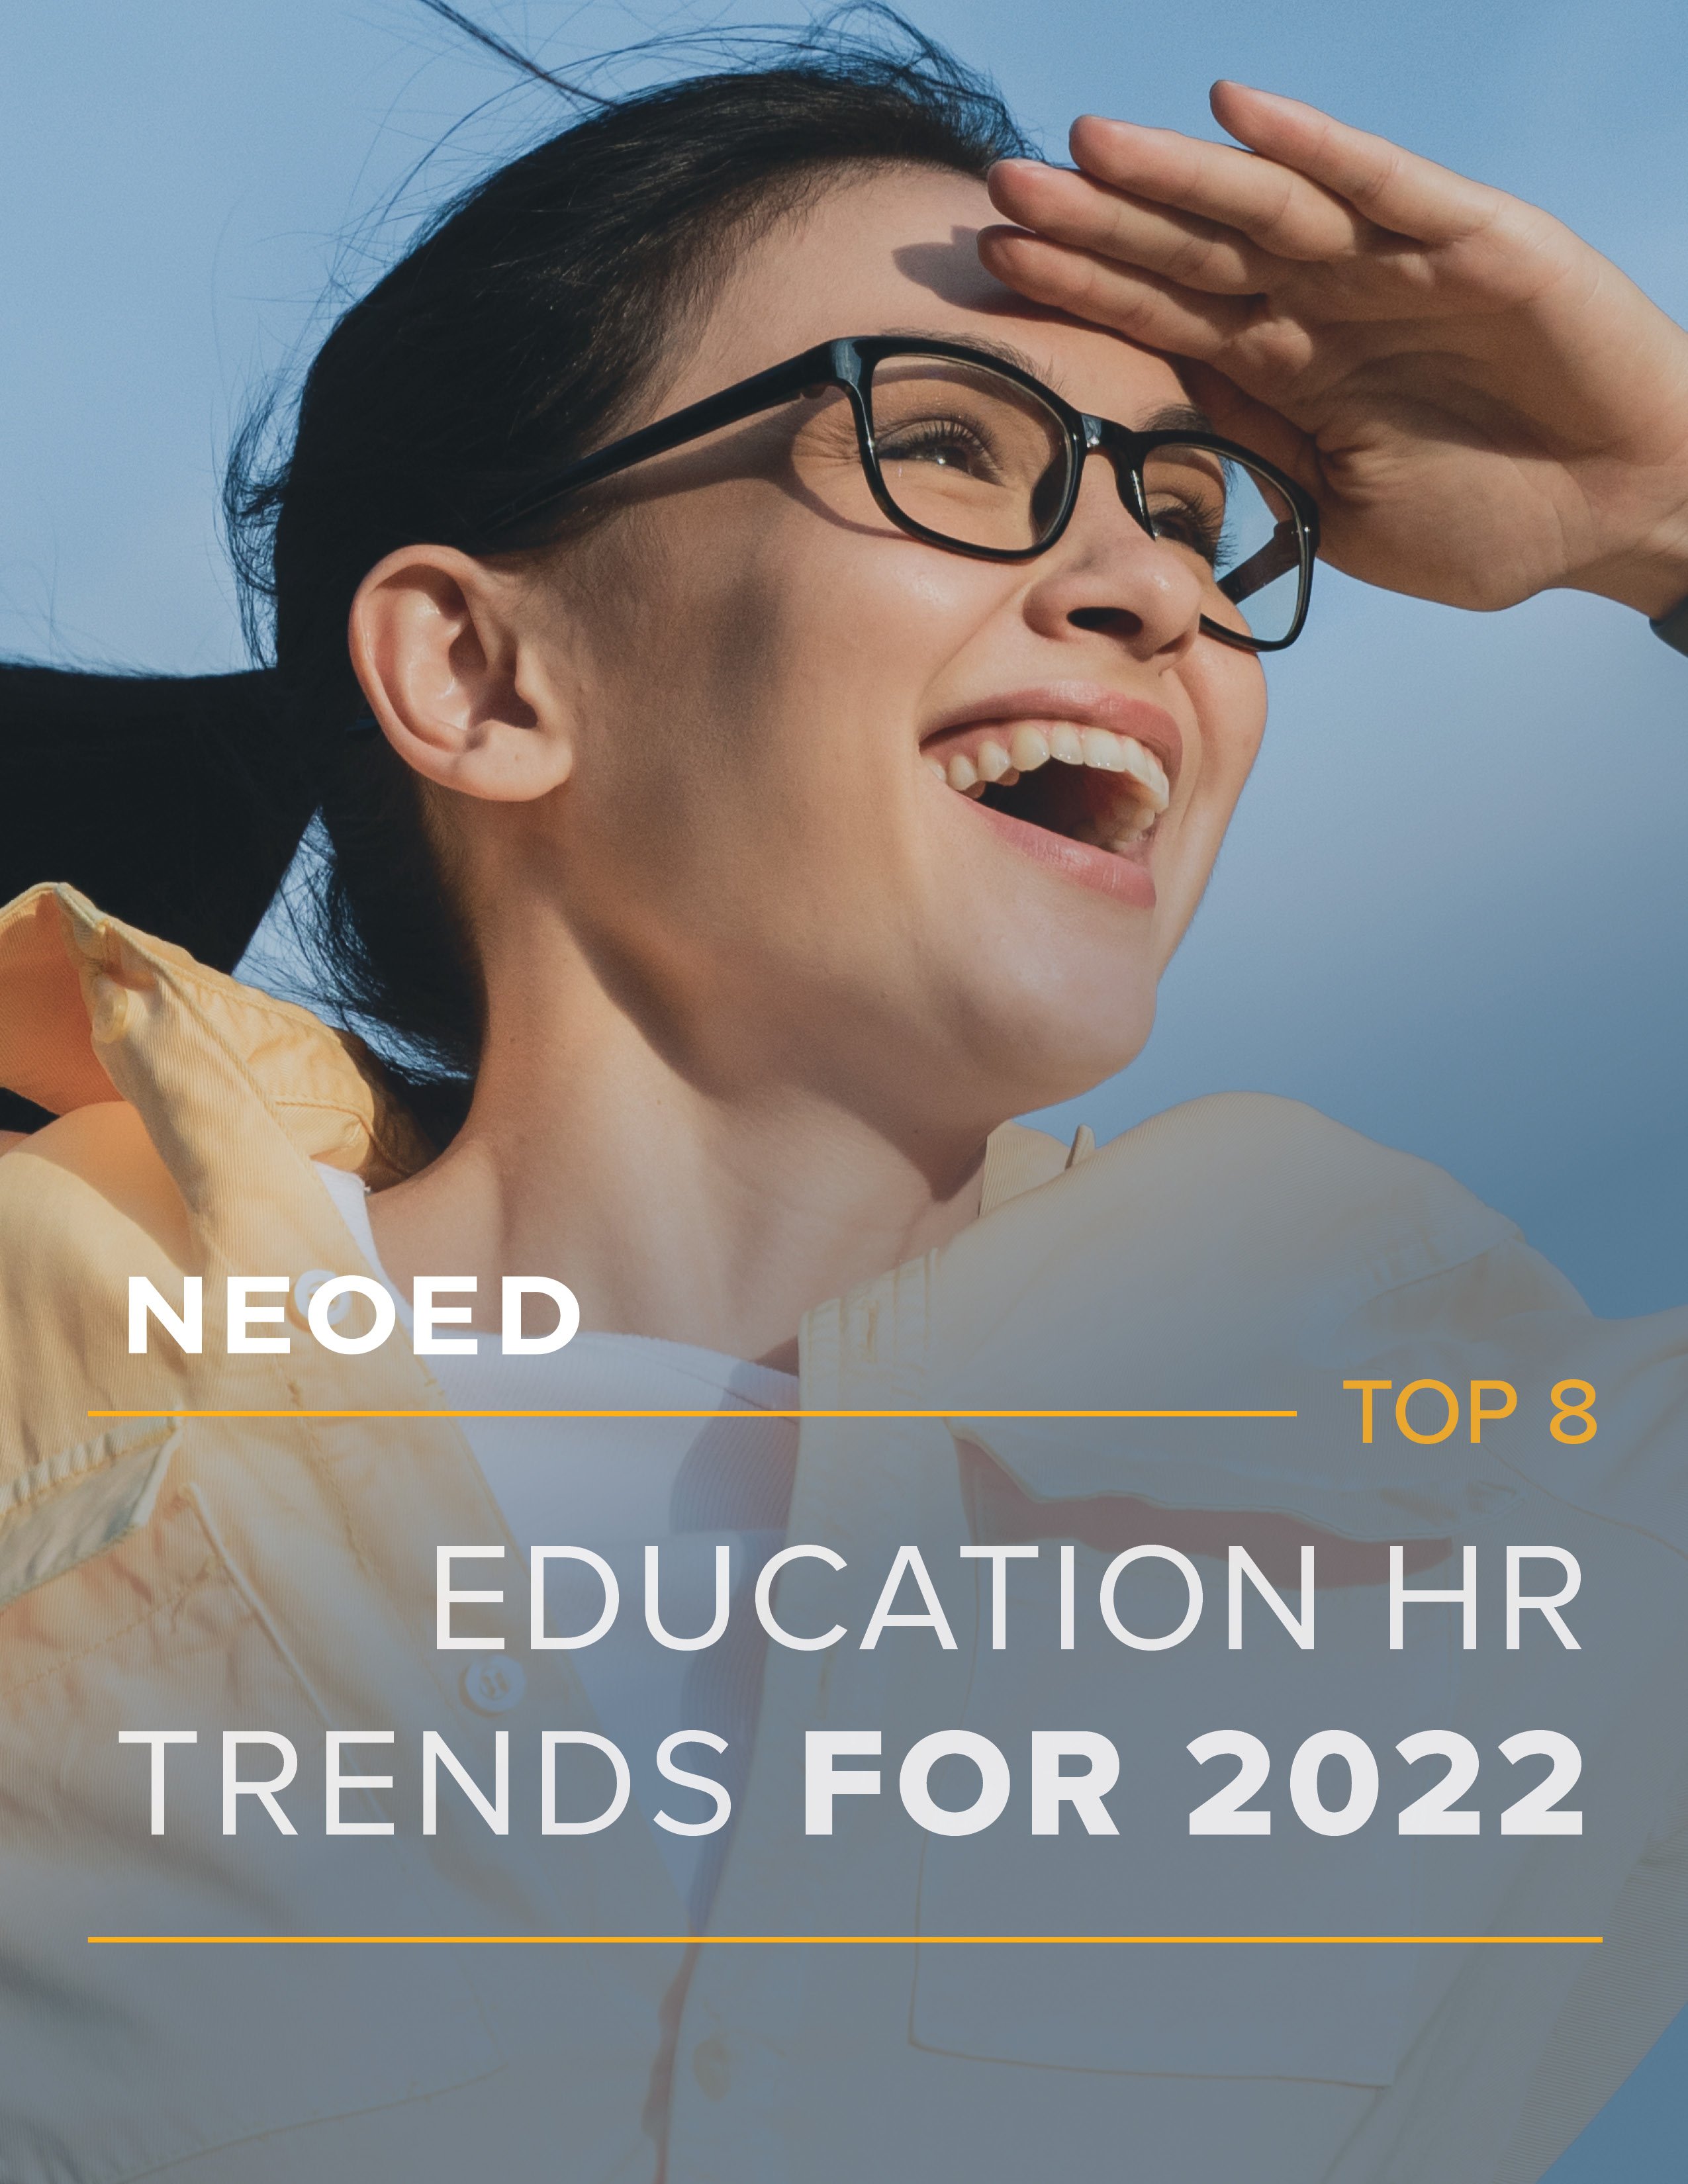 Top 10 Education HR Trends for 2022